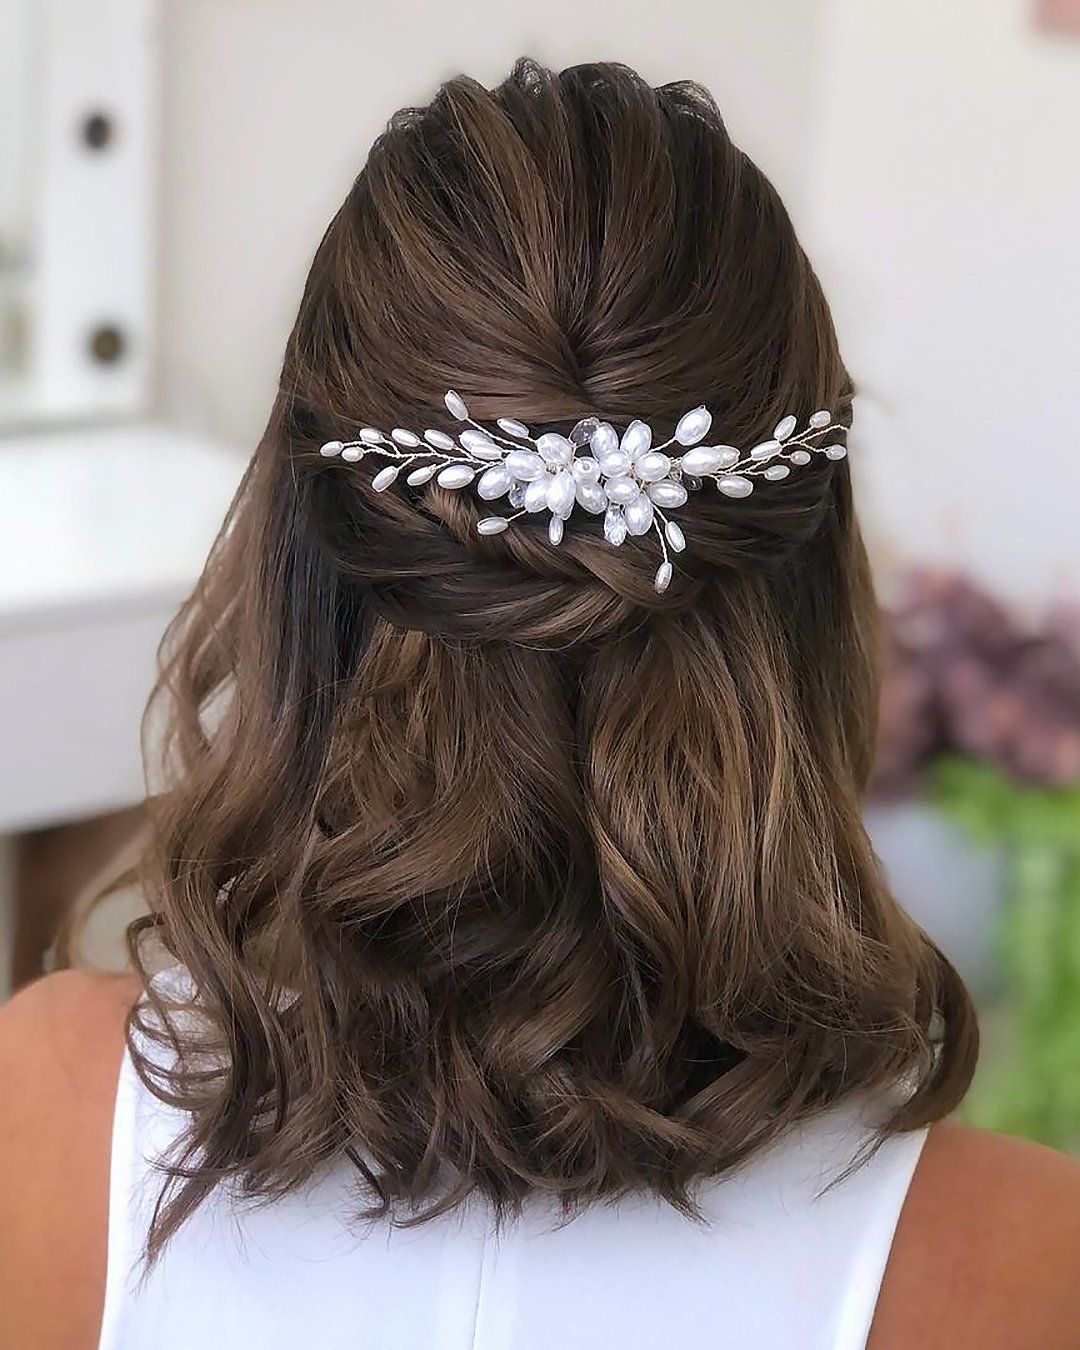 Stunning Wedding Hairstyles for Medium Length Hair: Perfect Options for Your Big Day